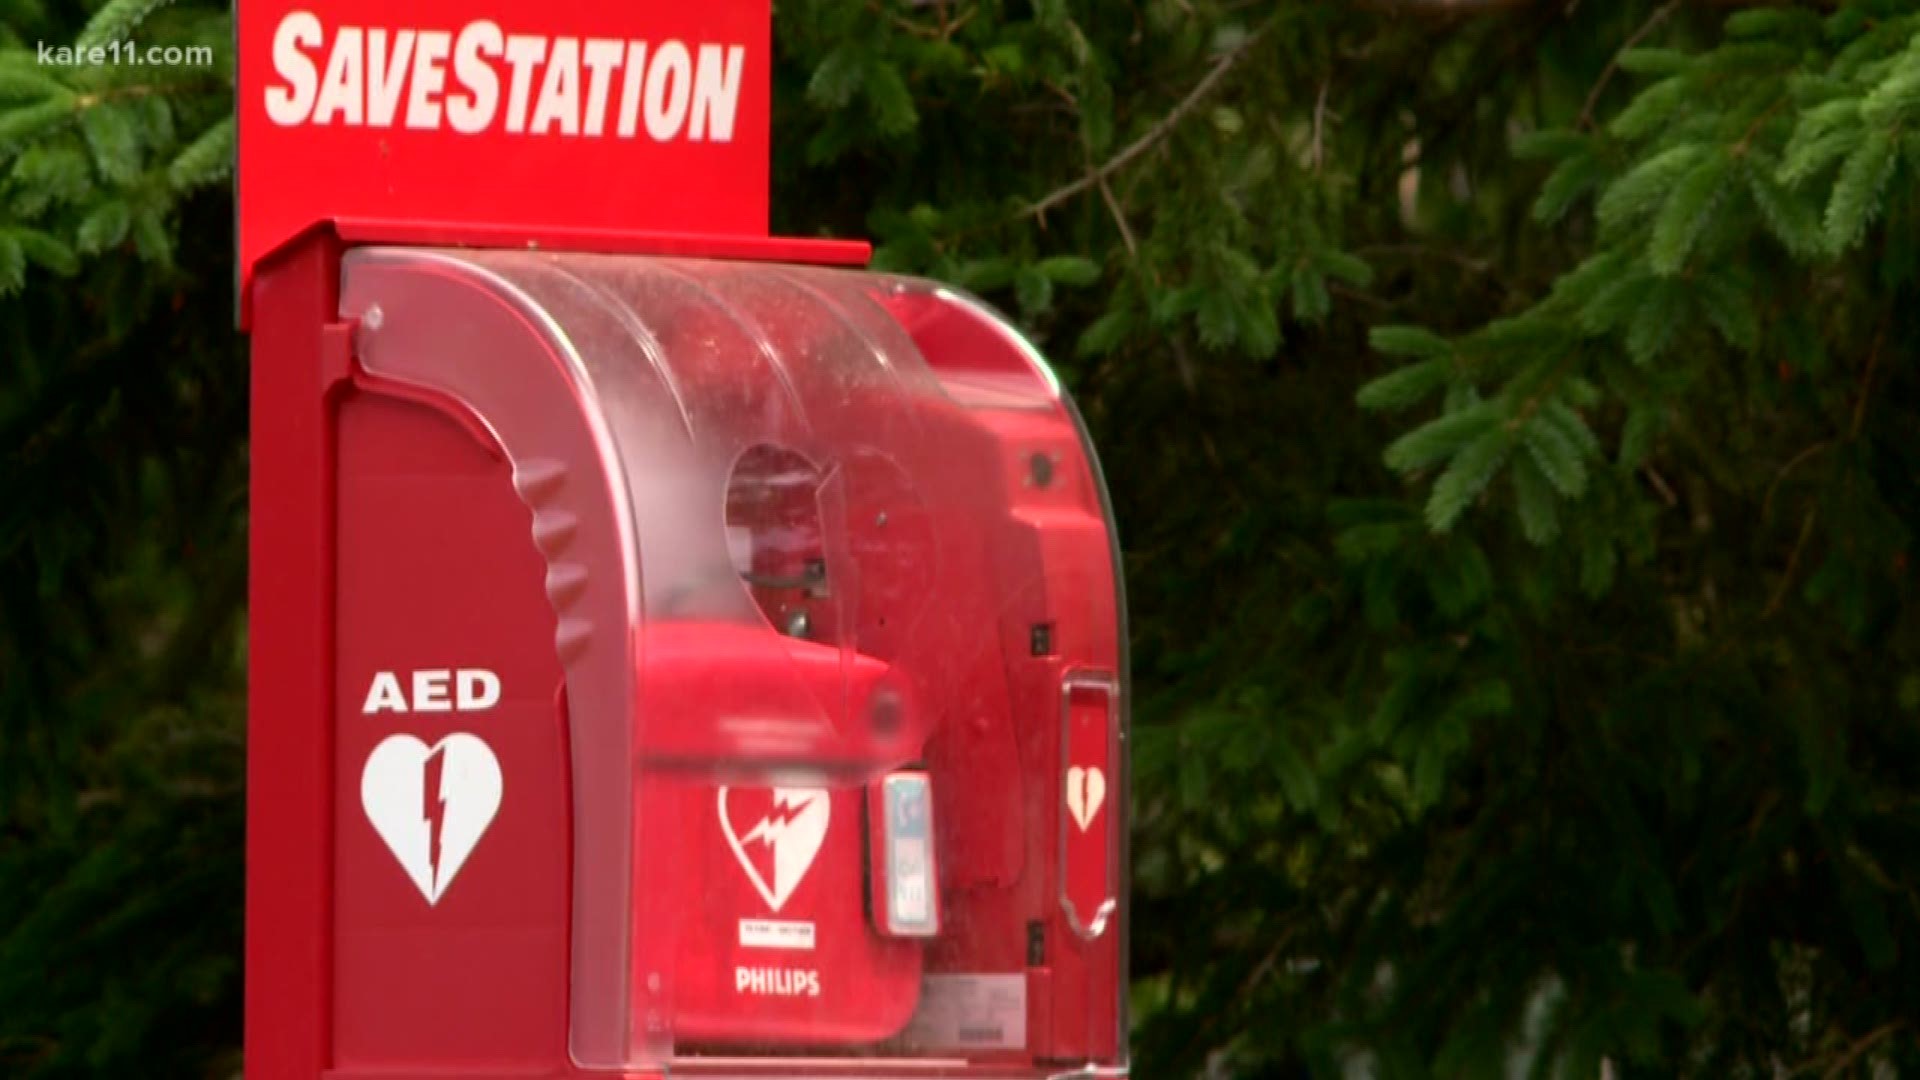 St. Joseph city leaders became first municipality to approve outdoor AED's in Minnesota.